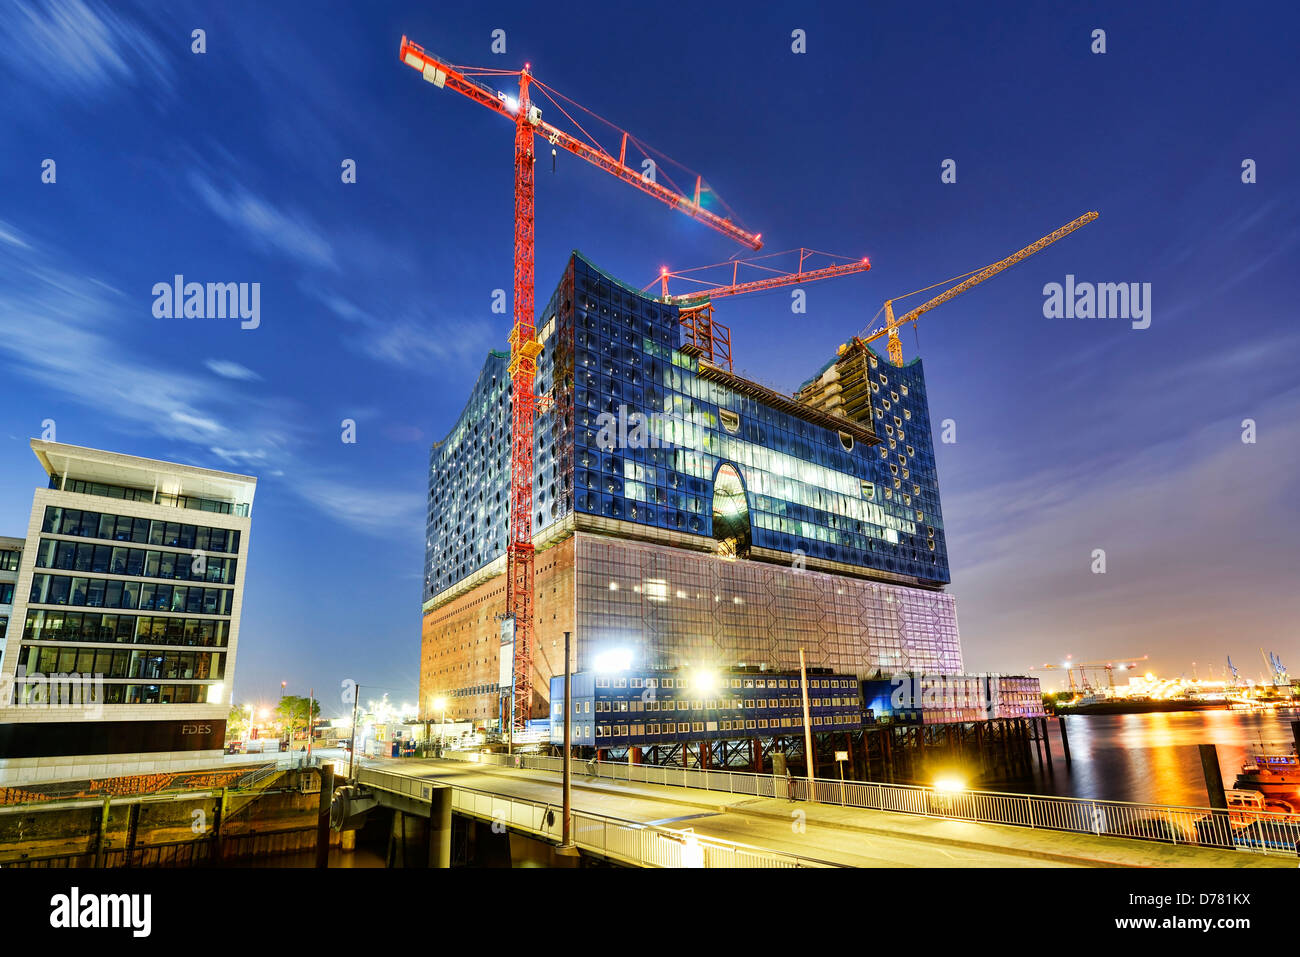 The Elbphilharmonie located under construction in the harbour city of Hamburg, Germany, Europe Stock Photo